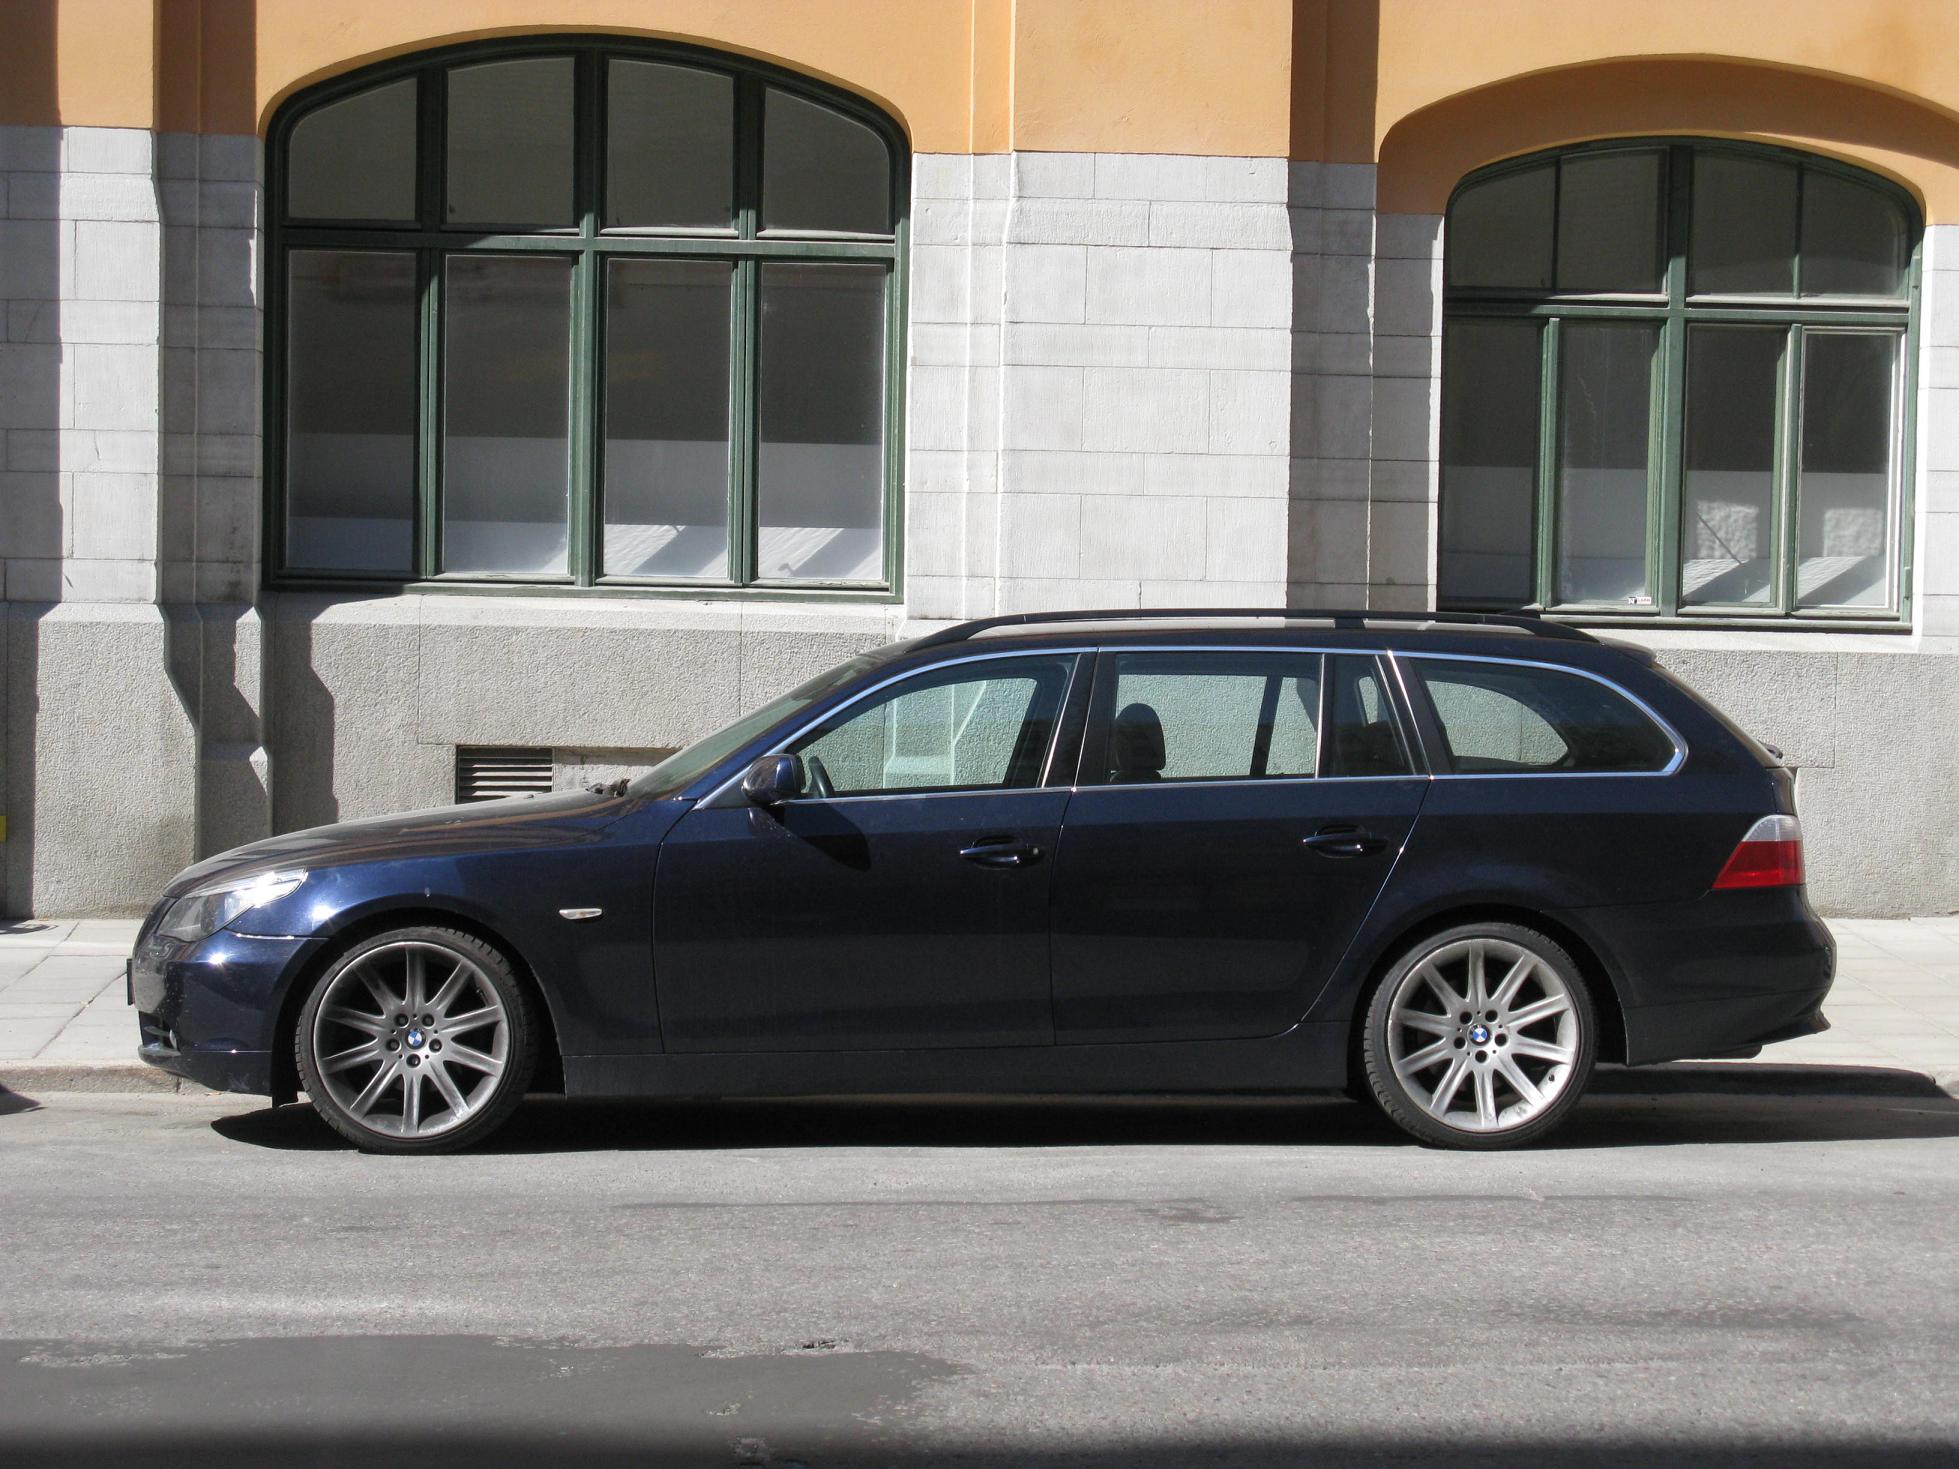 BMW 535d Touring | Flickr - Photo Sharing!